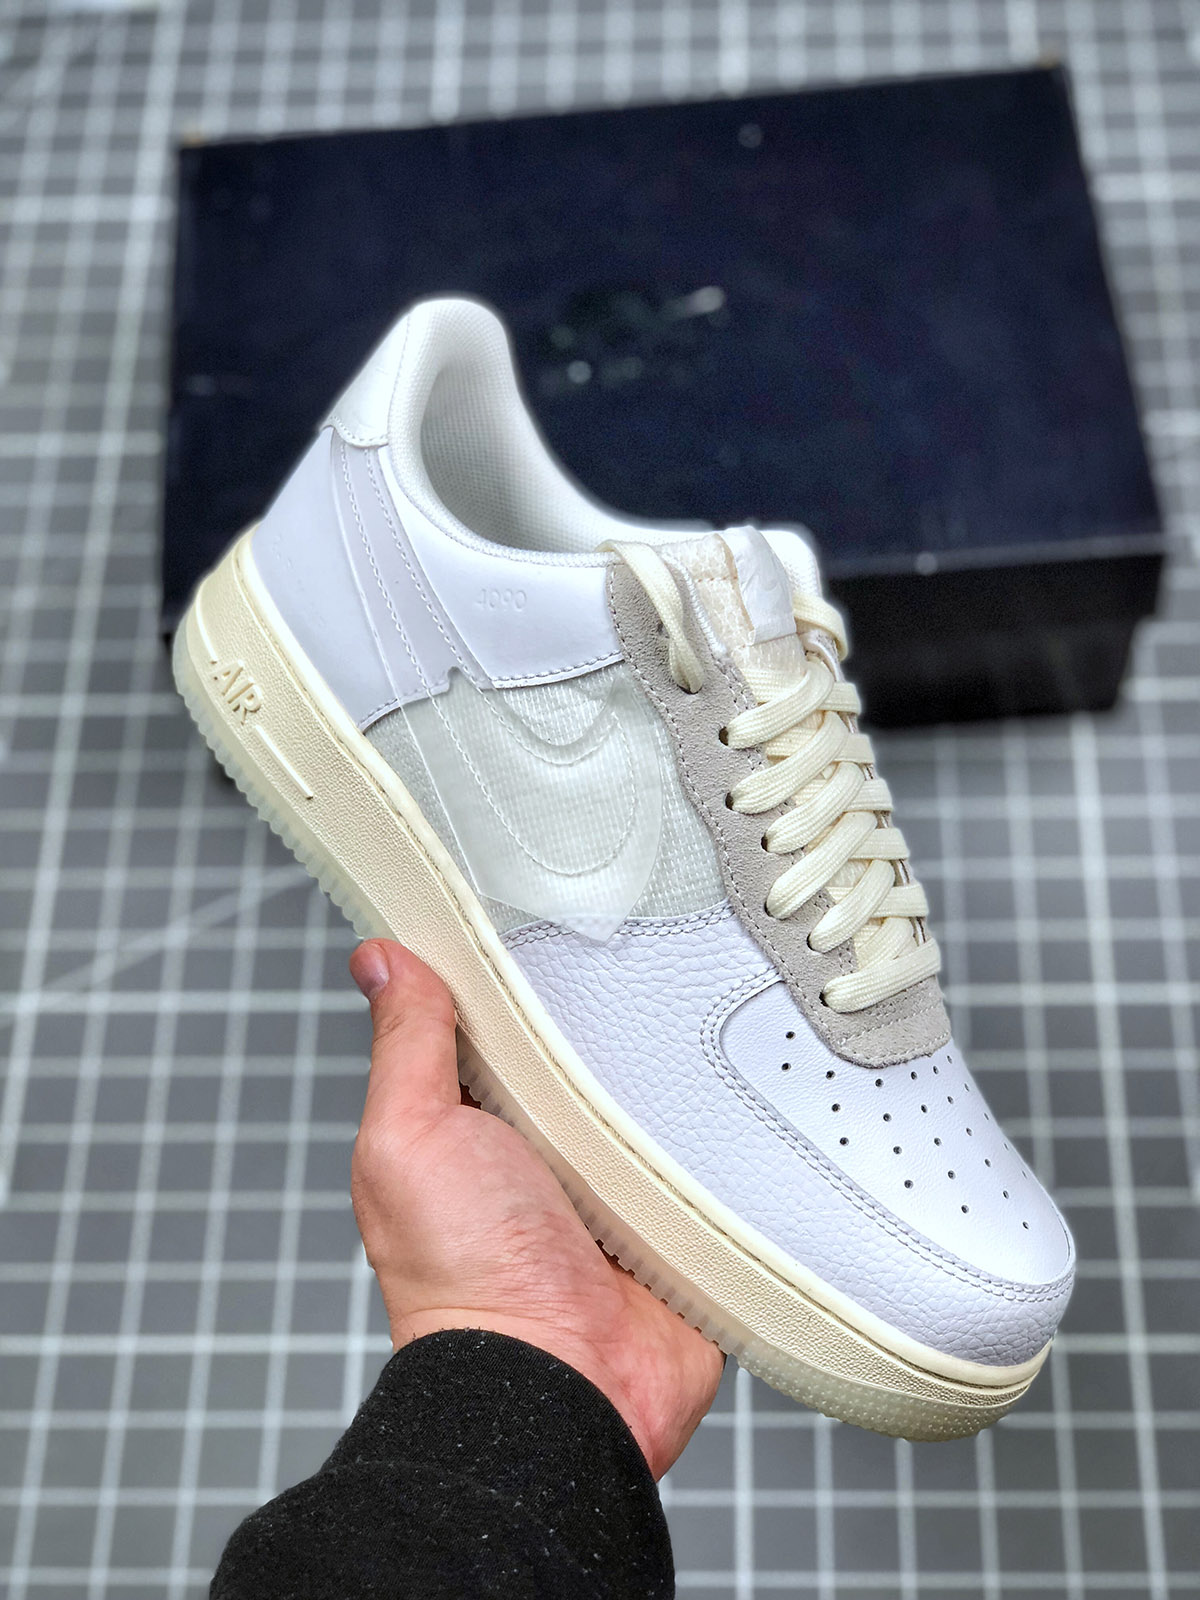 Nike Air Force 1 Low DNA White CV3040-100 For Sale – Sneaker Hello